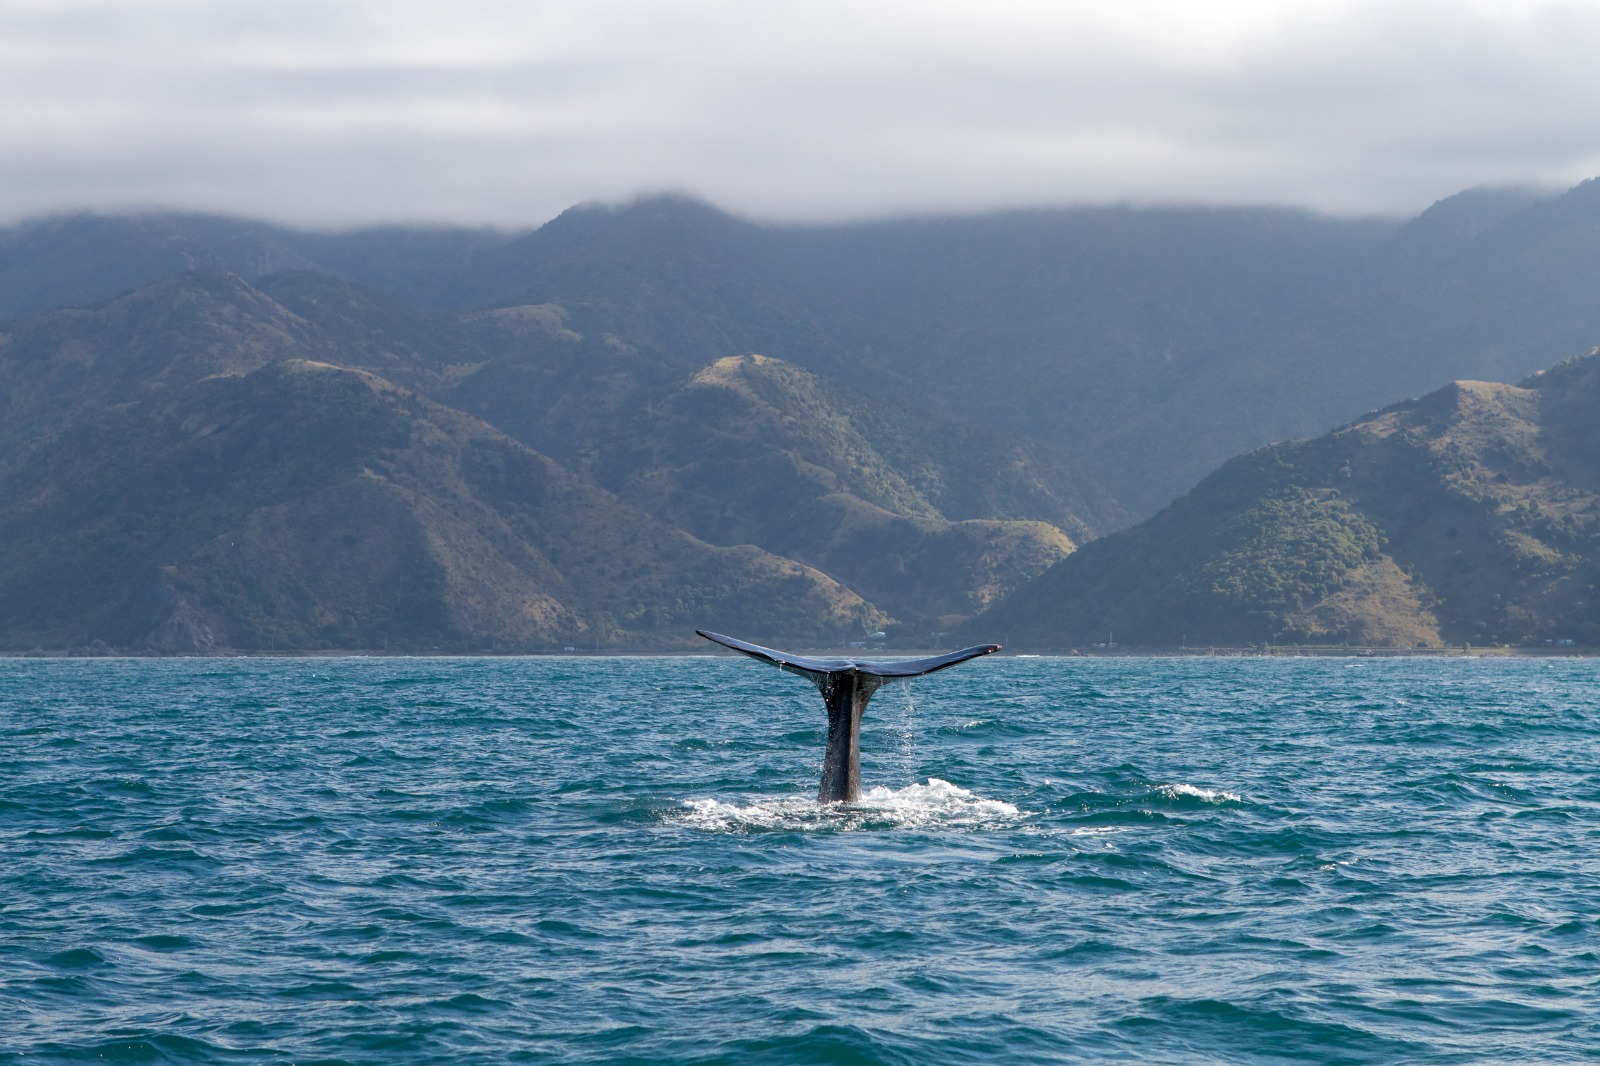 sperm whale tail out of the water in kaikoura new zealand